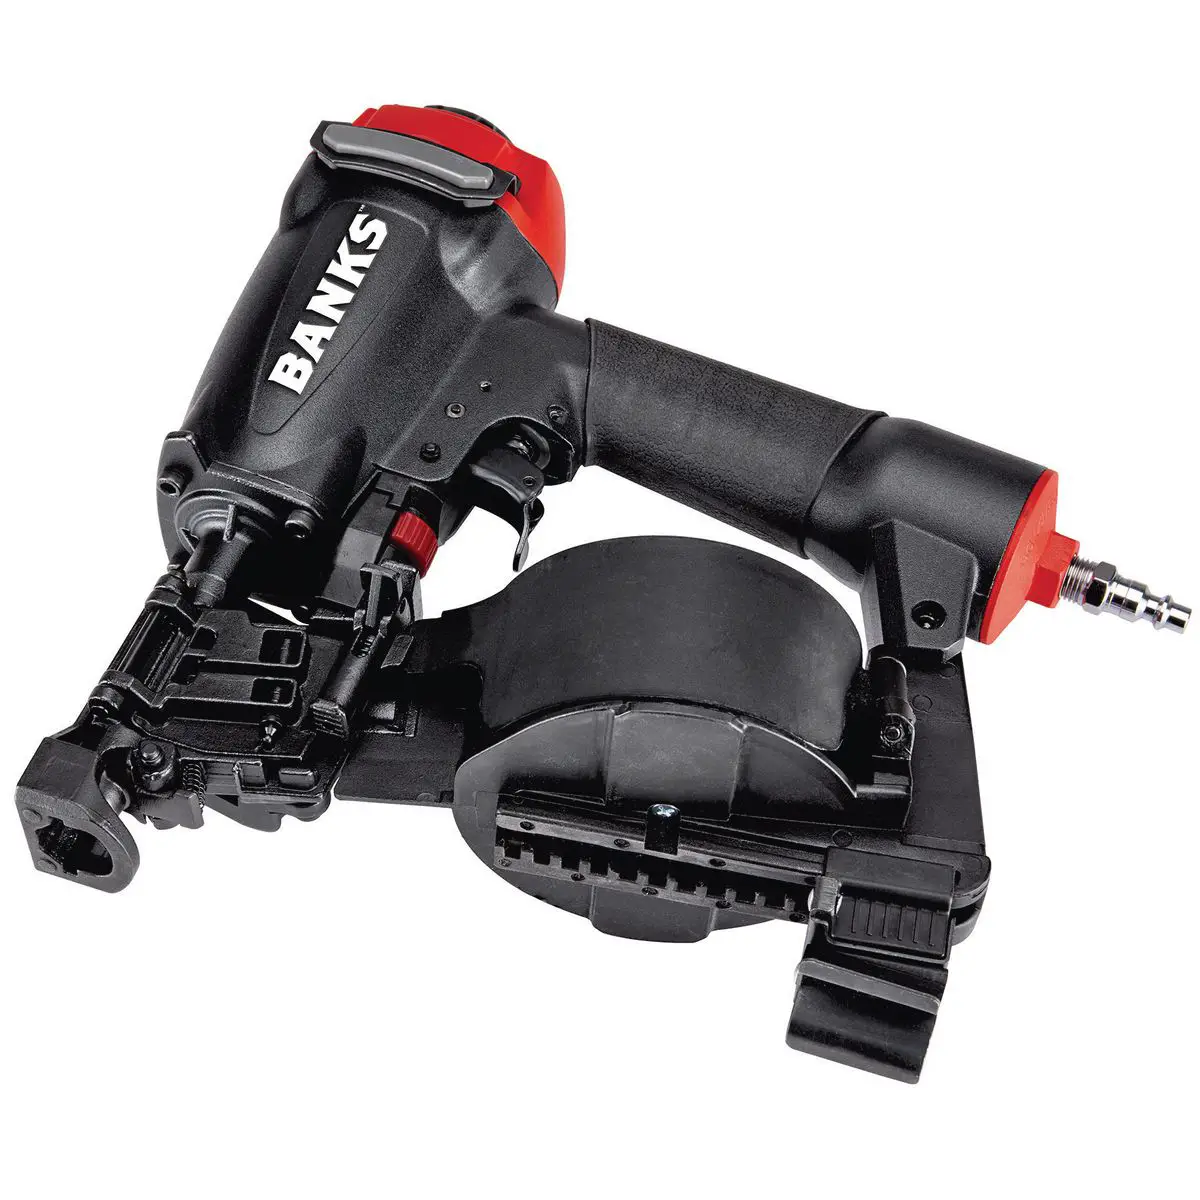 15° Coil Roofing Nailer